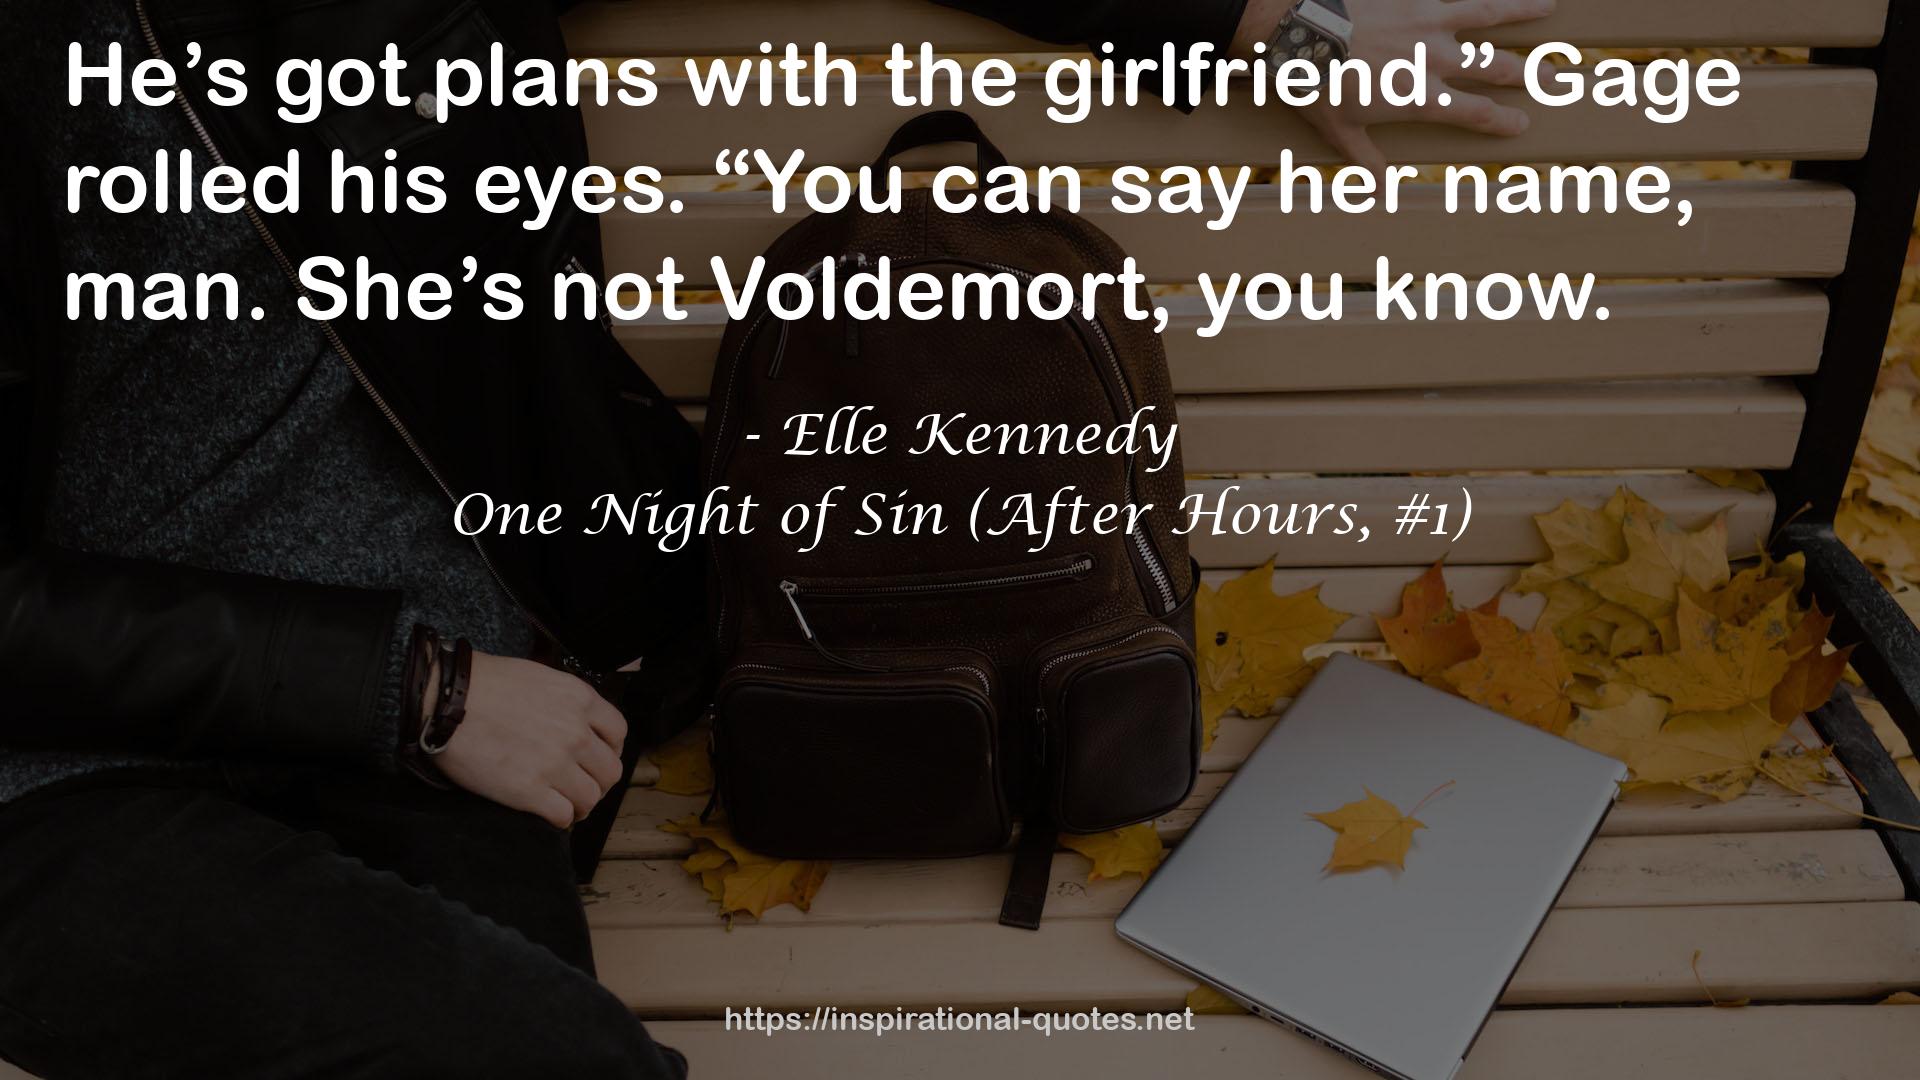 One Night of Sin (After Hours, #1) QUOTES